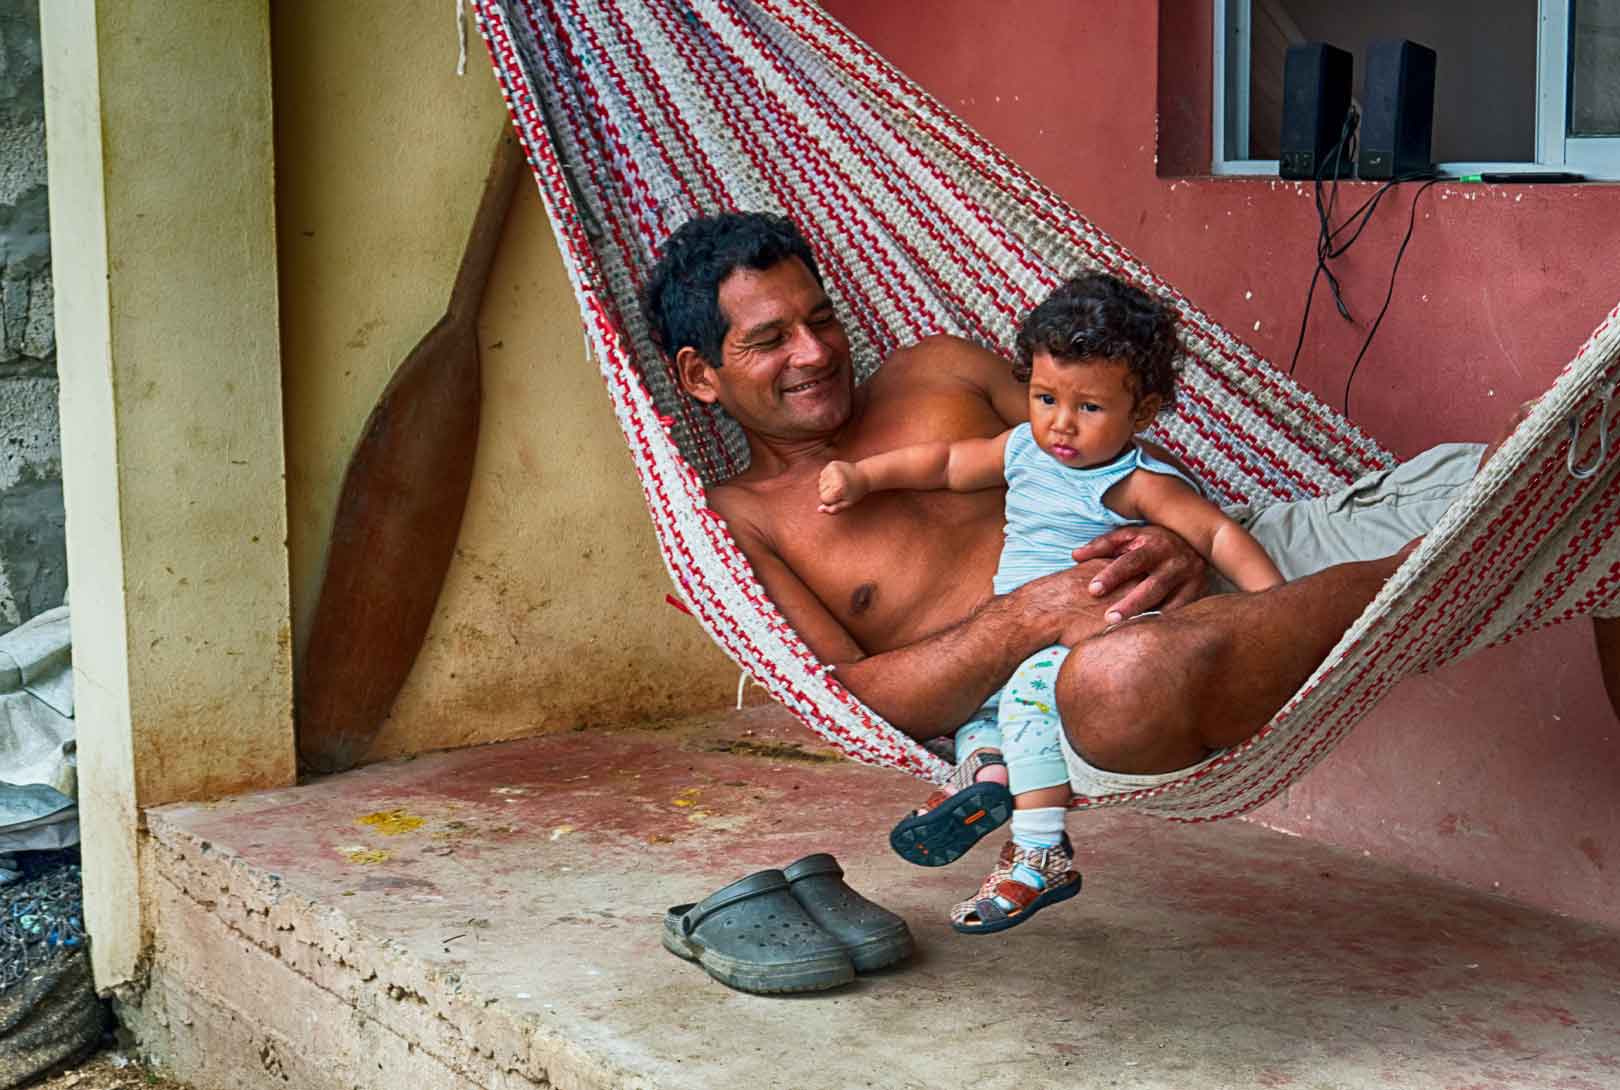 A Man And a Young Child In A Hammock In Ecuador